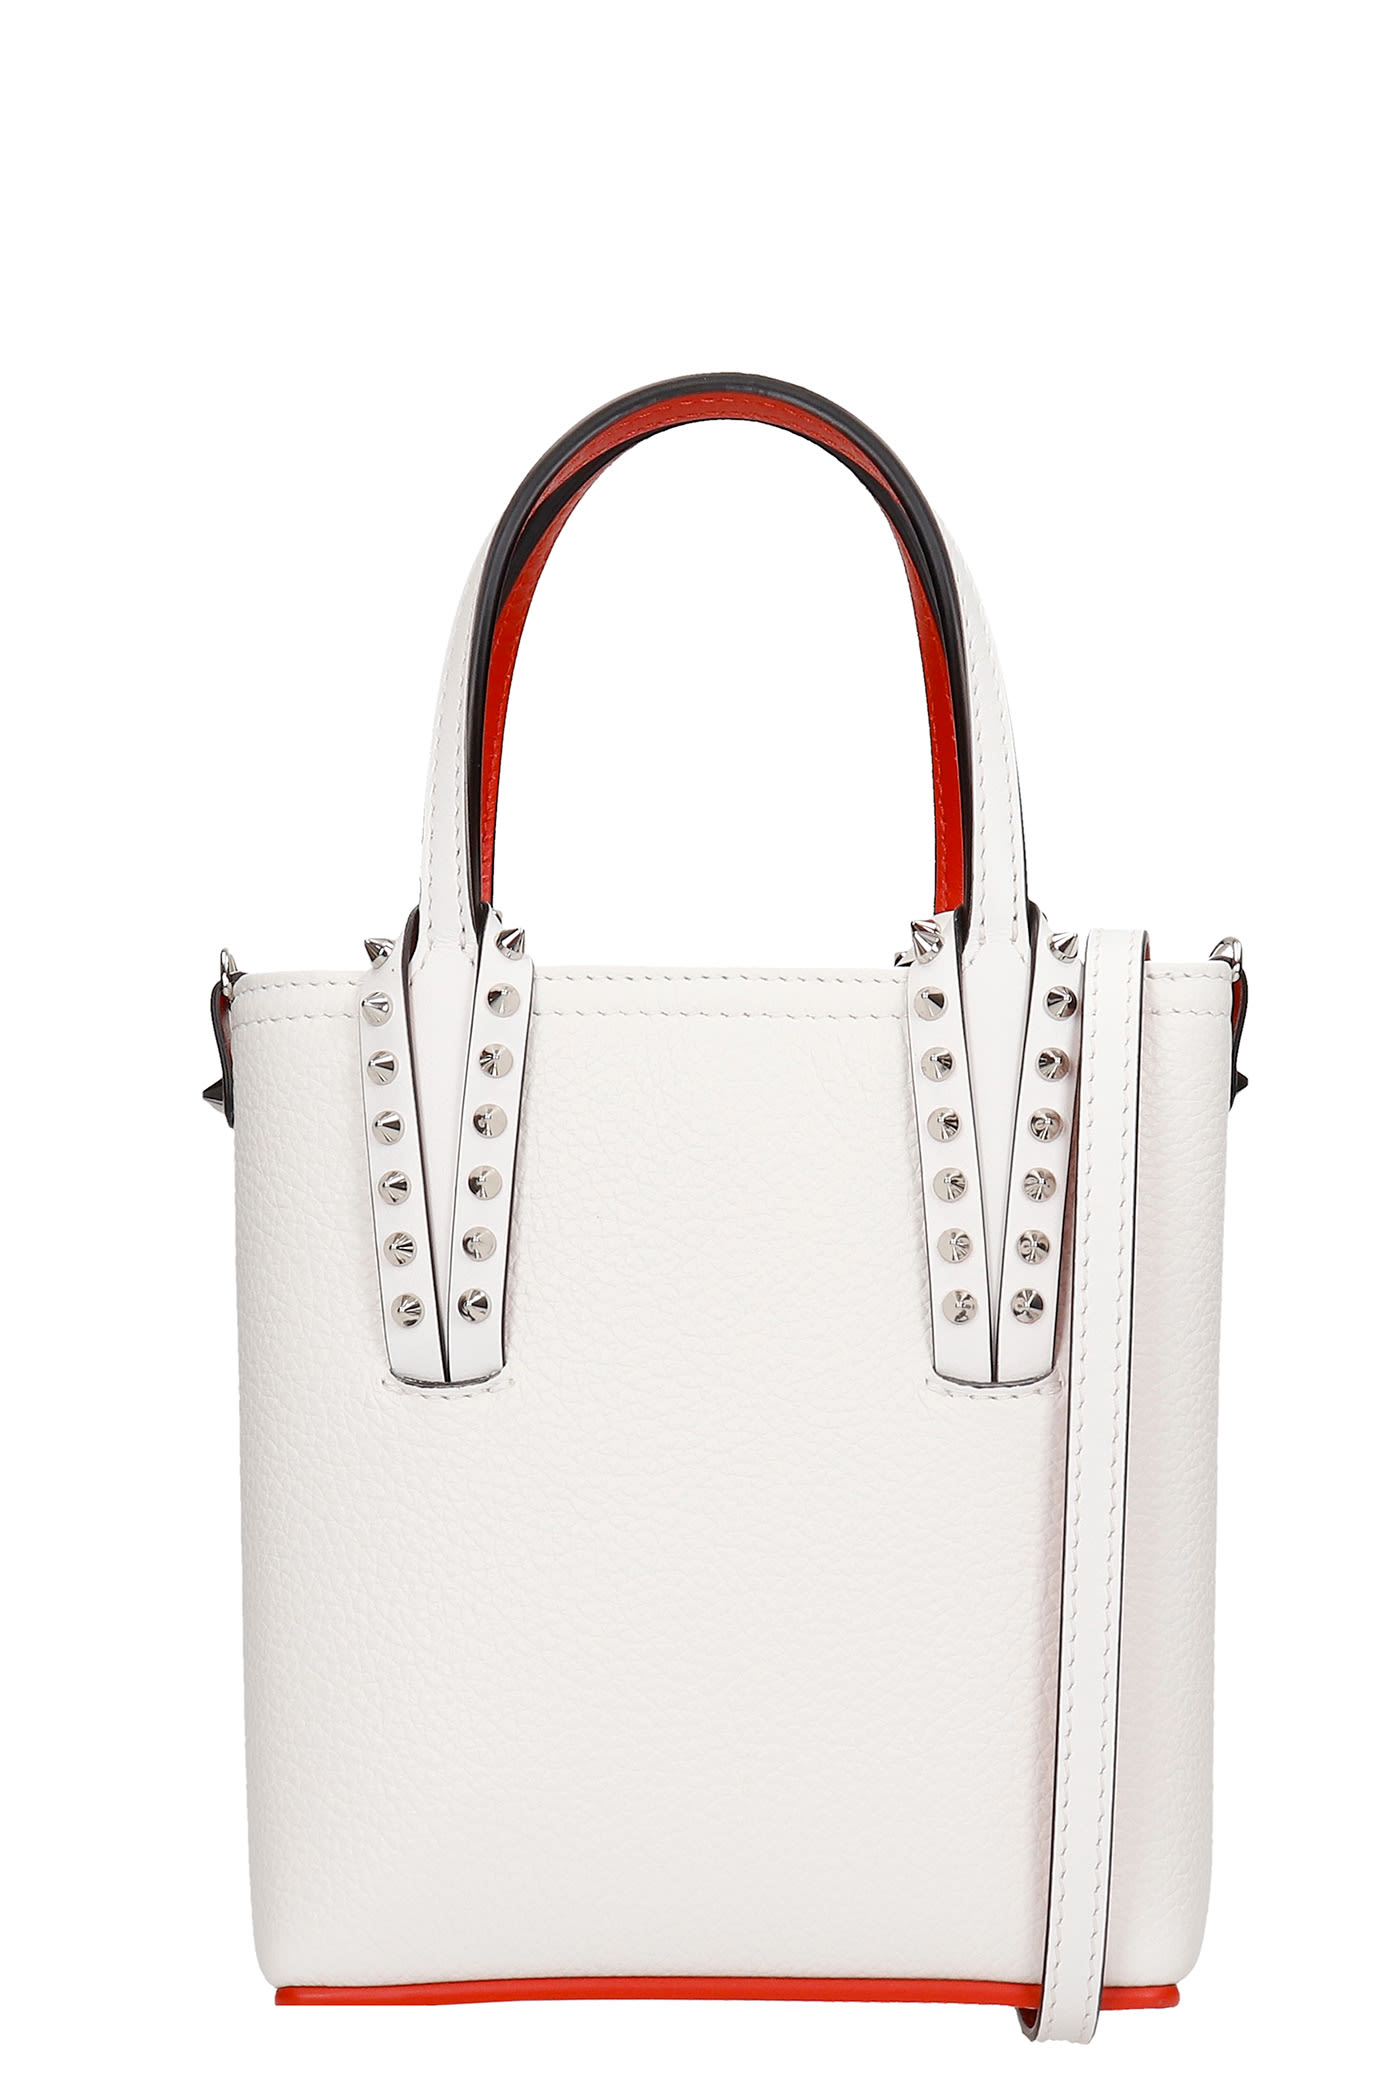 CHRISTIAN LOUBOUTIN CABATA HAND BAG IN WHITE LEATHER,11788099